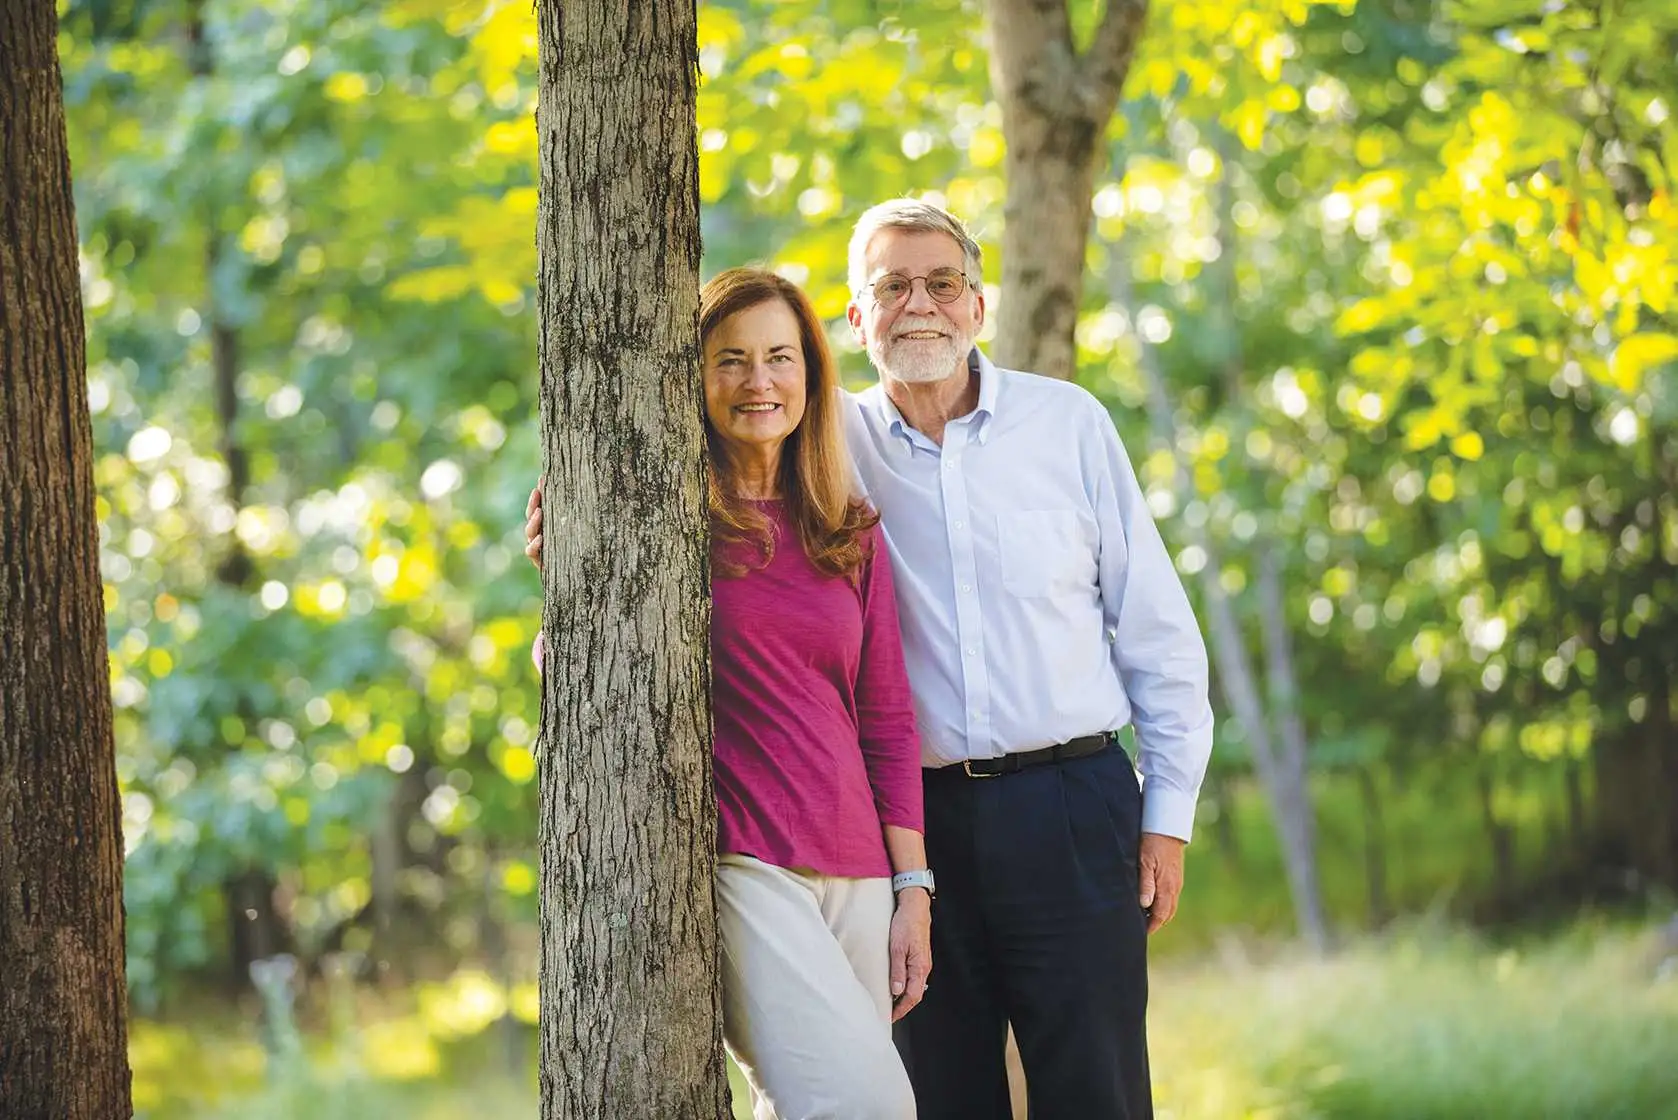 Alumni Weber family smiling at the camera while posing against a tree.